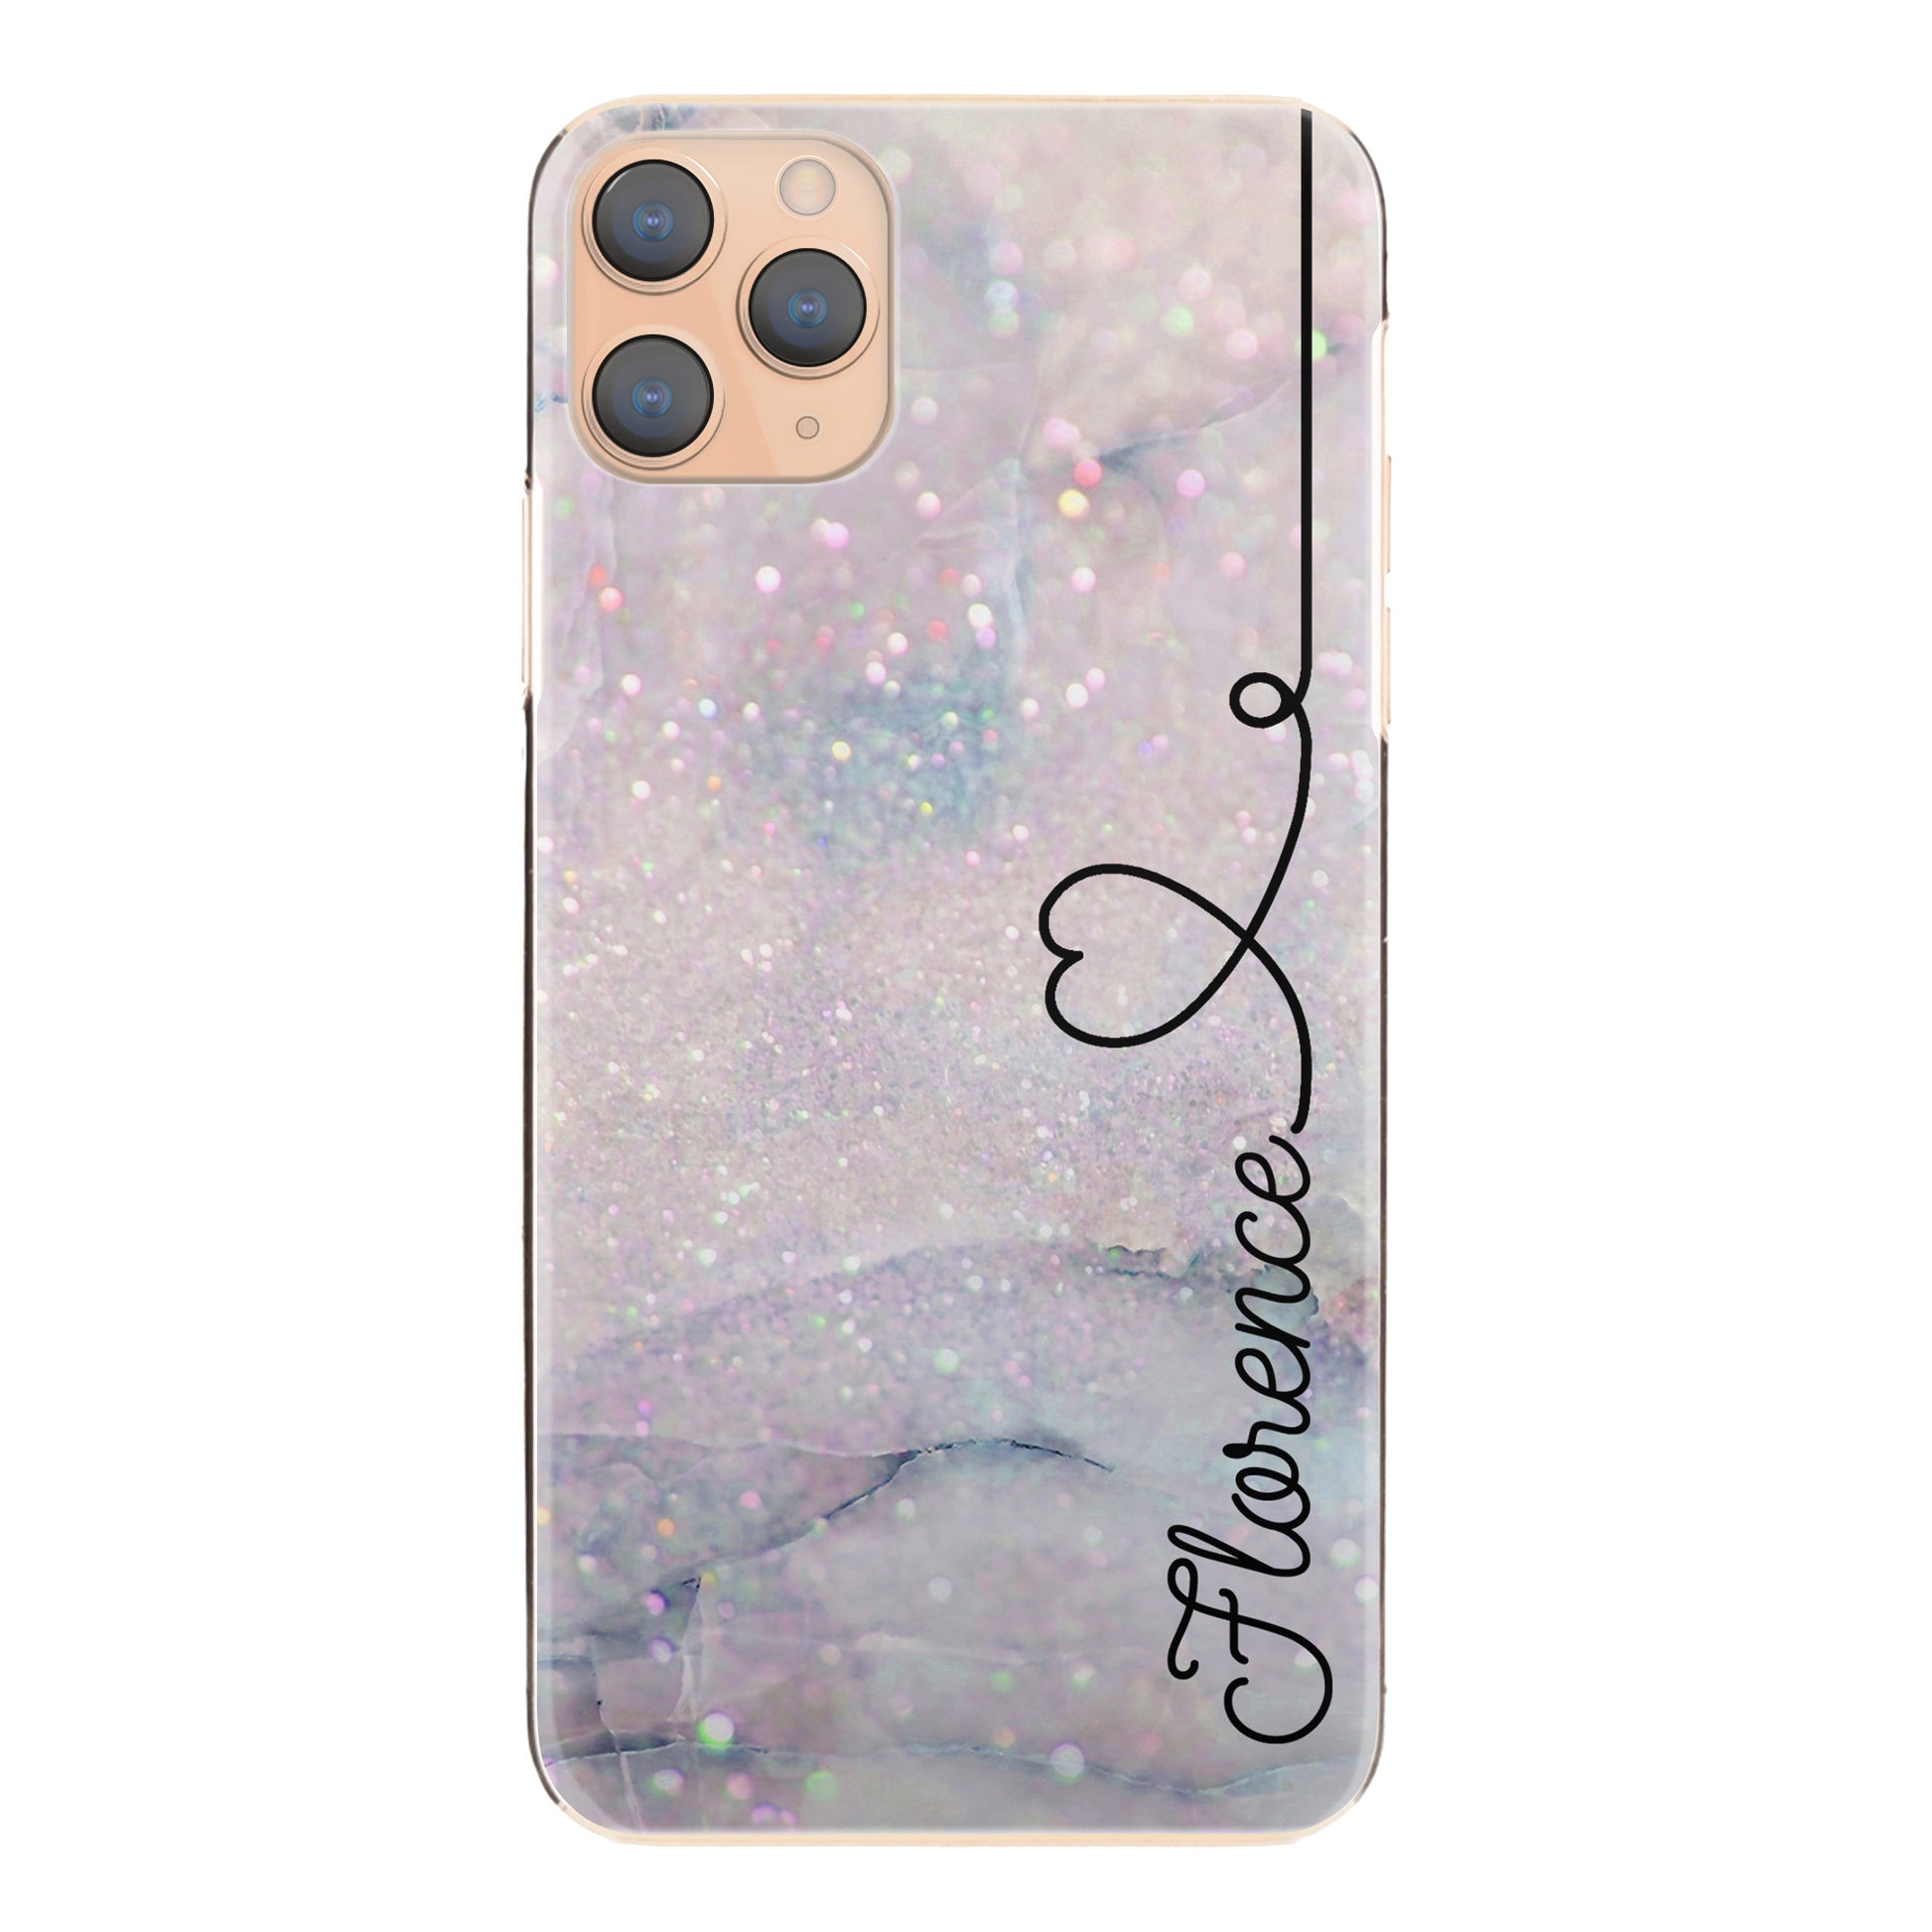 Personalised Oppo Phone Hard Case with Stylish Text and Heart Line on Textured Glitter Effect